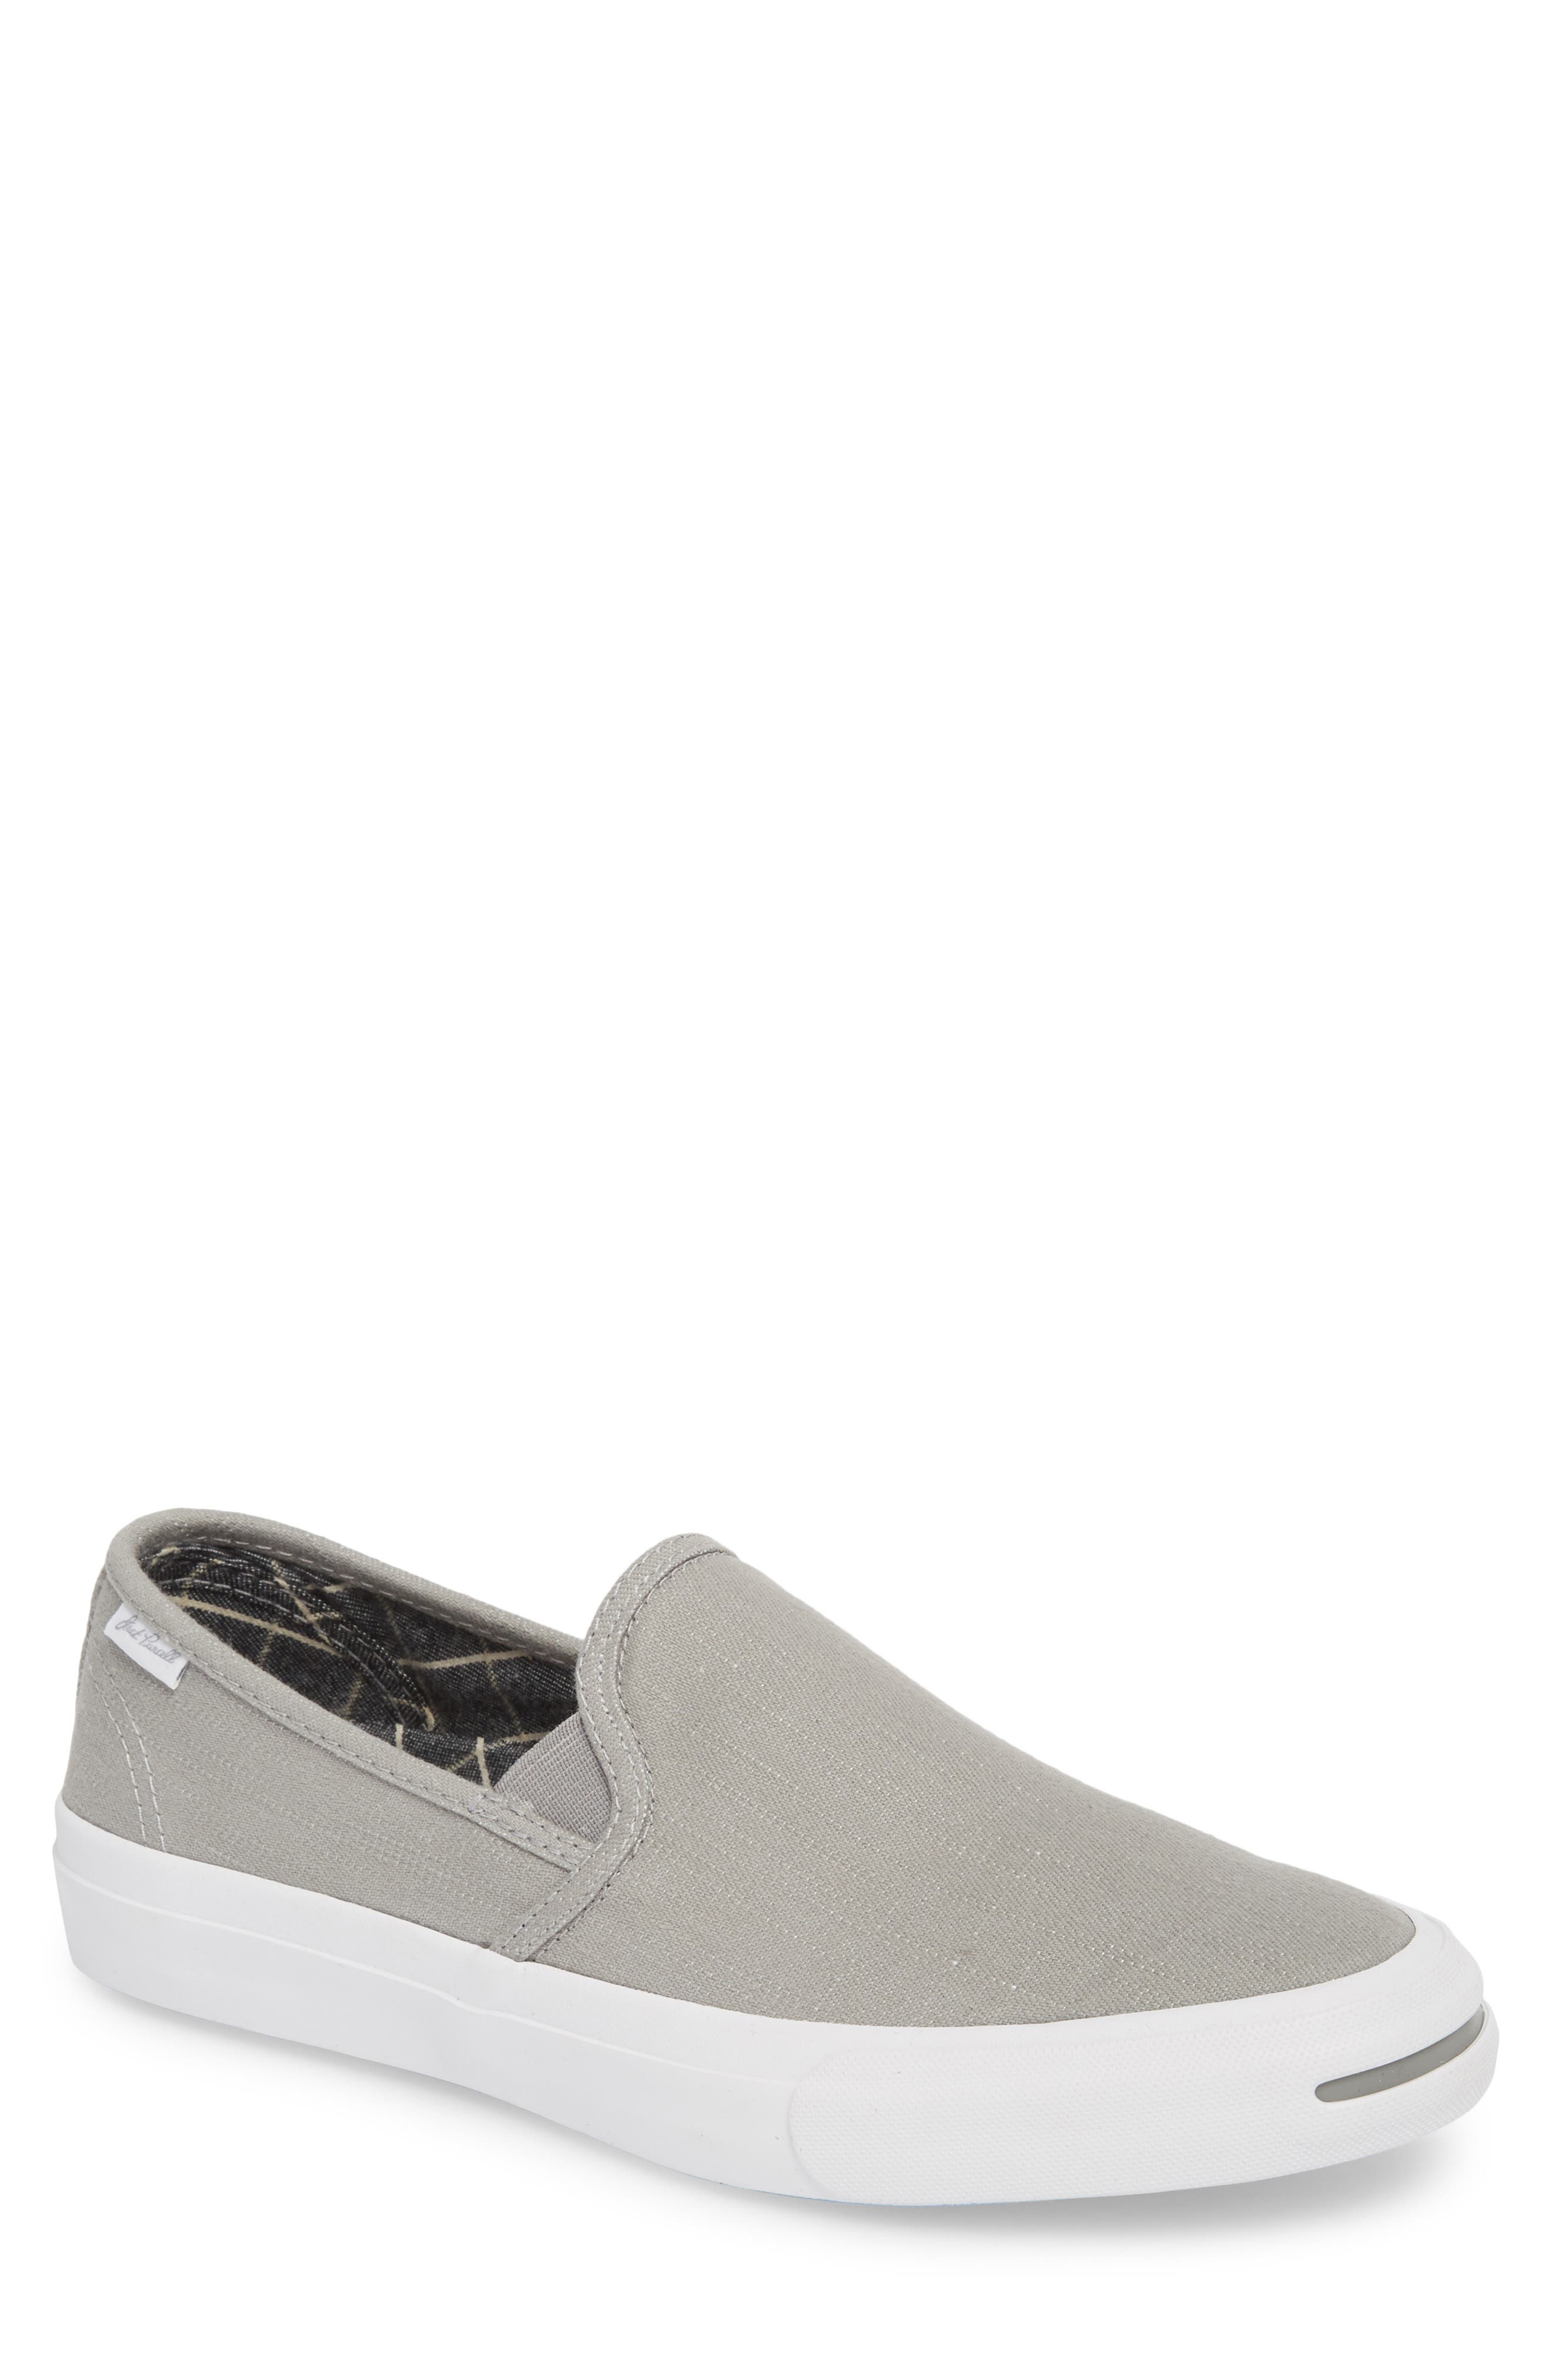 converse jack purcell low profile low top unisex slip